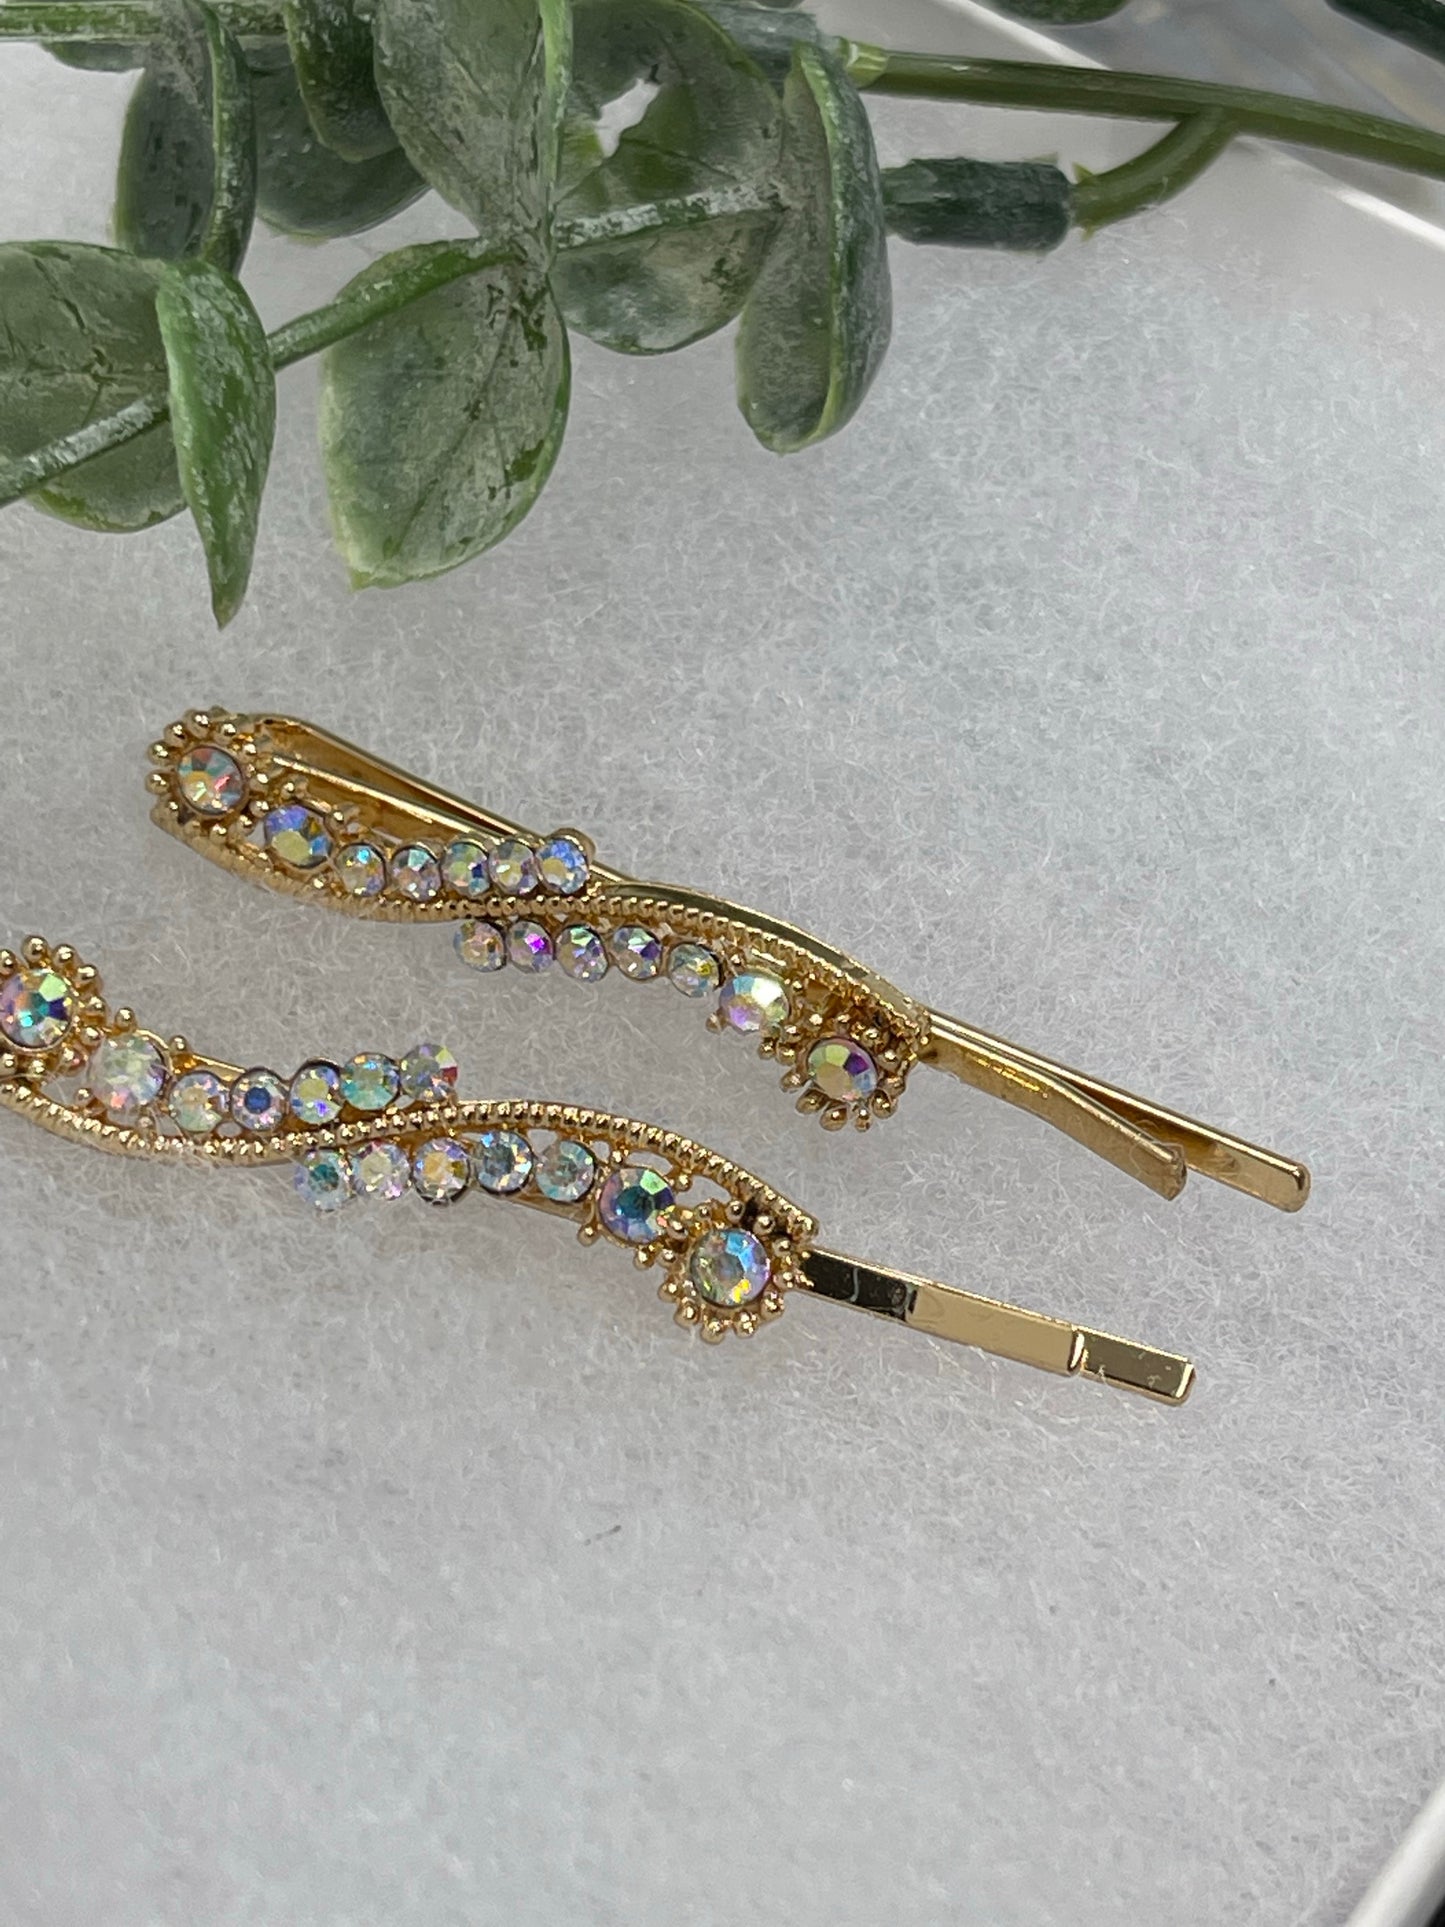 Iridescent crystal rhinestone approximately 2.0” gold tone hair pins 2 pc set wedding bridal shower engagement formal princess accessory accessories